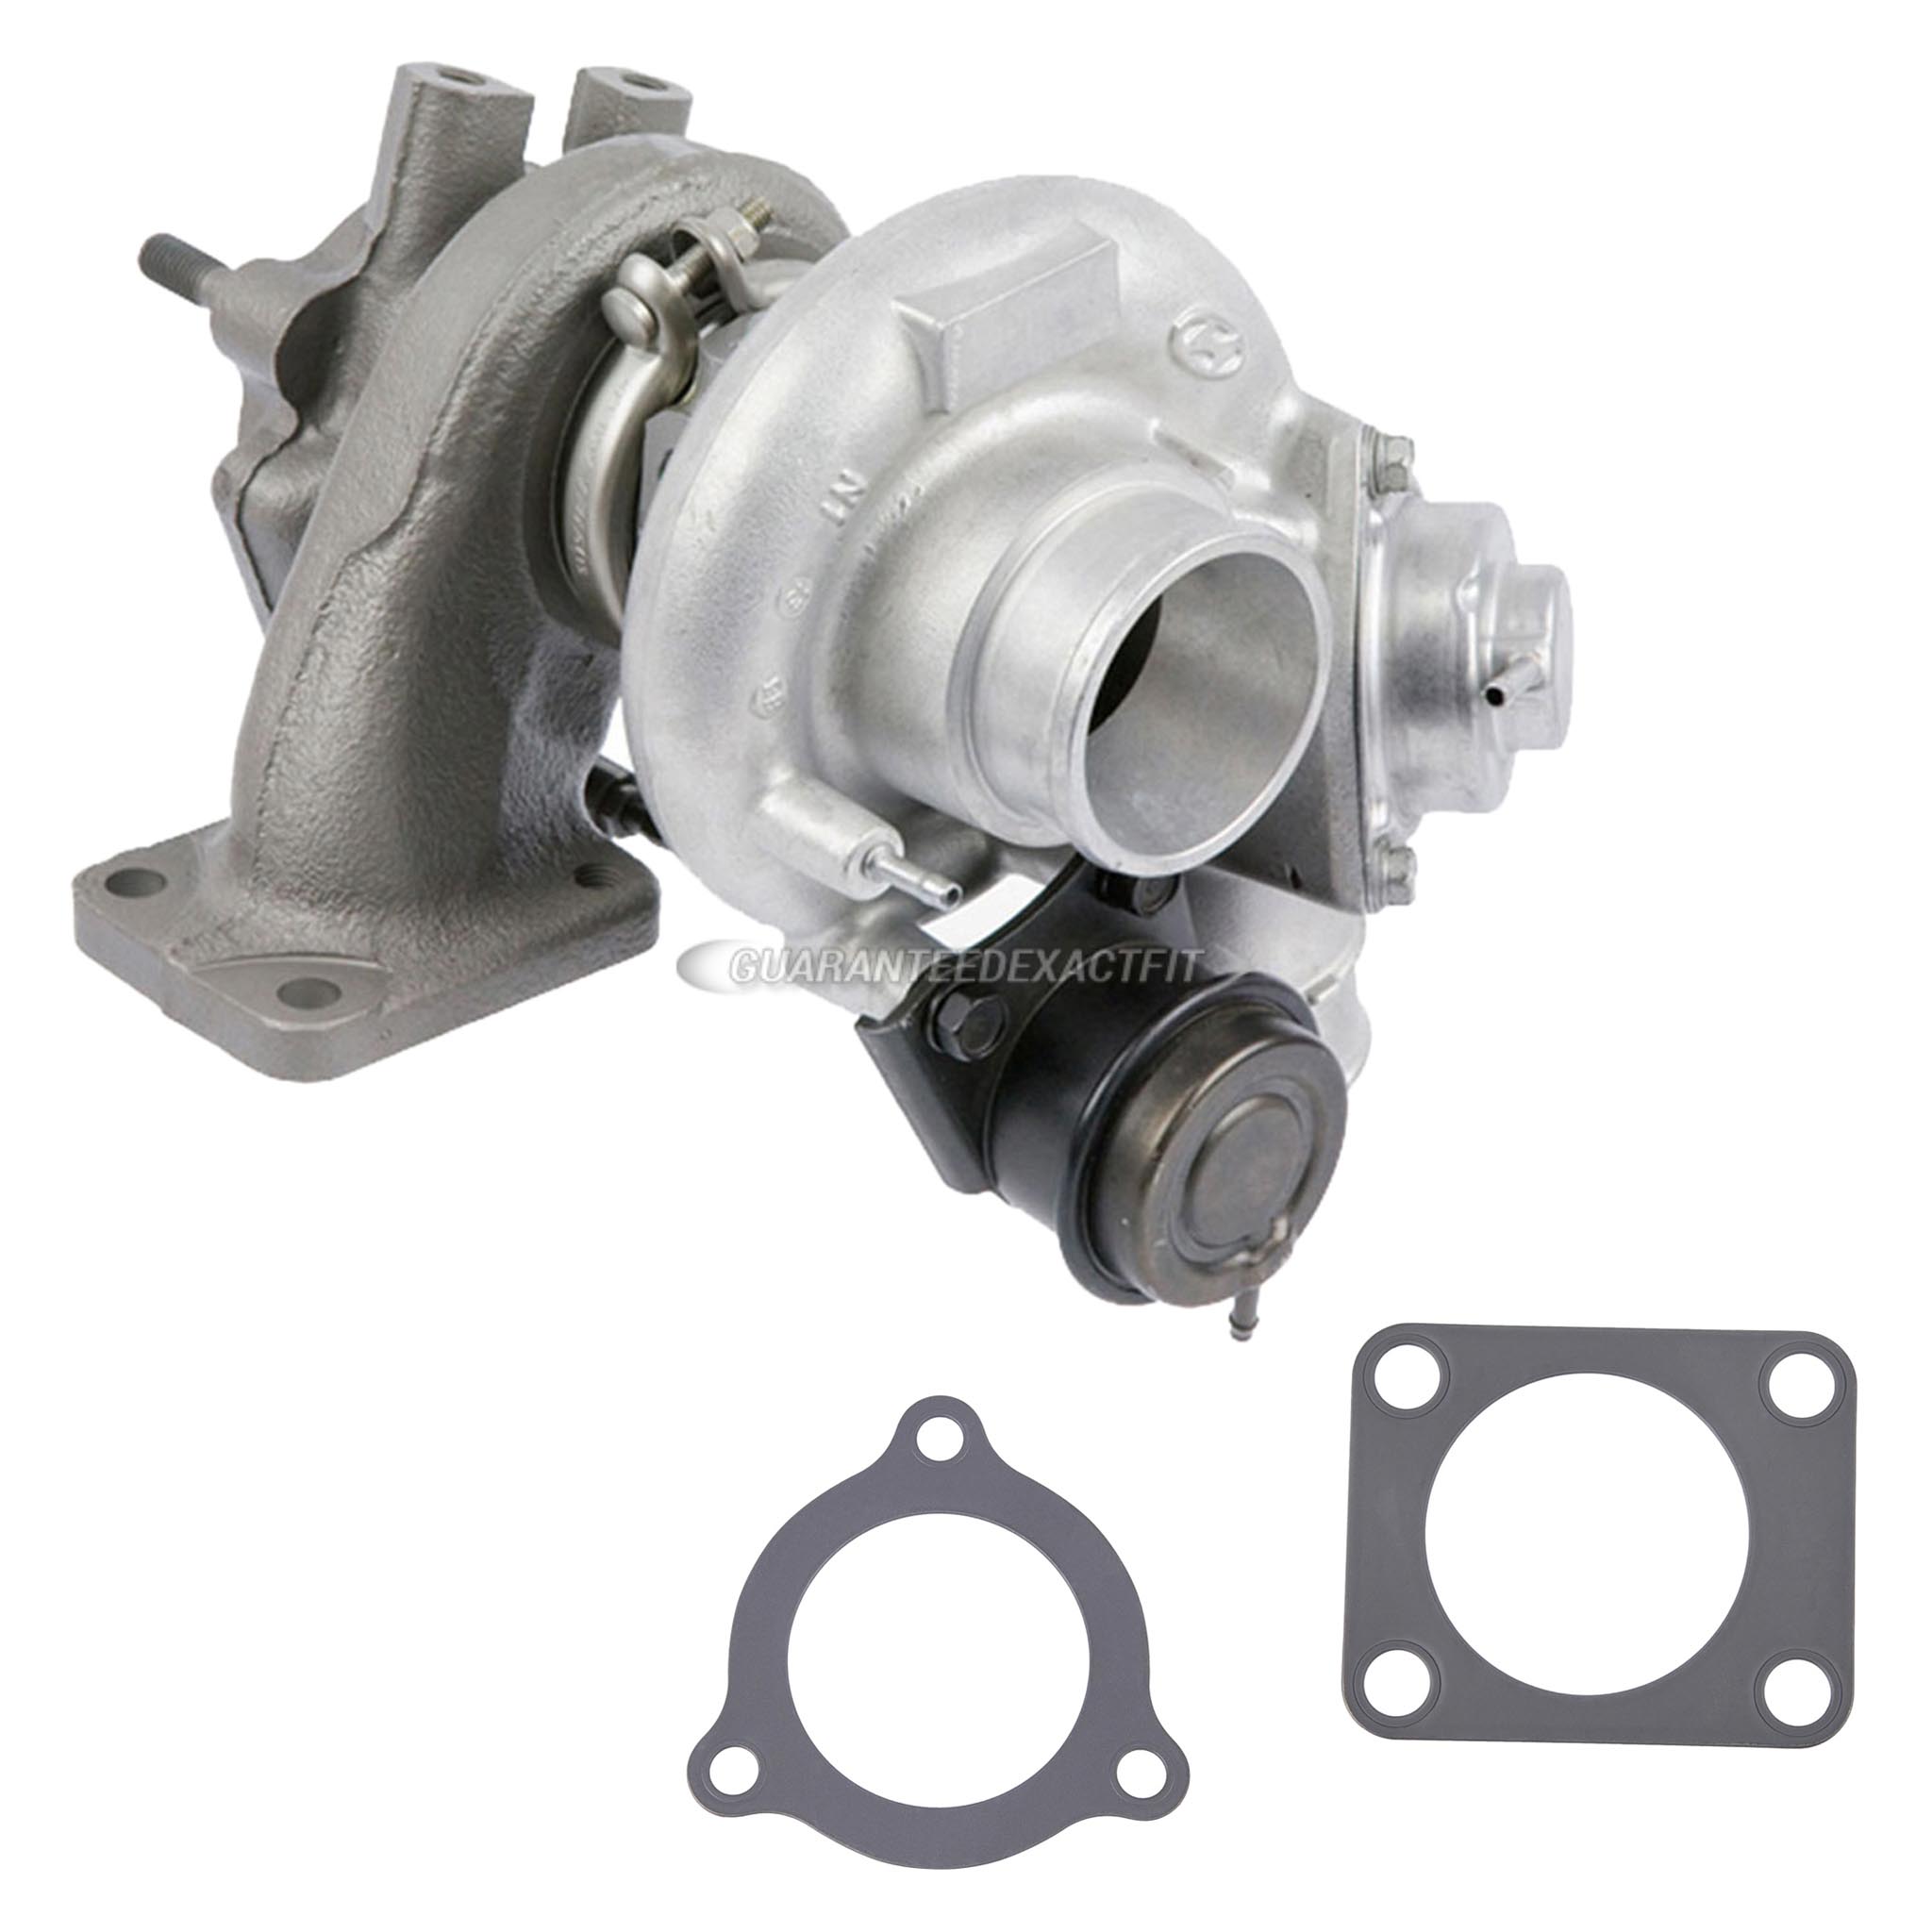 2011 Hyundai genesis coupe turbocharger and installation accessory kit 